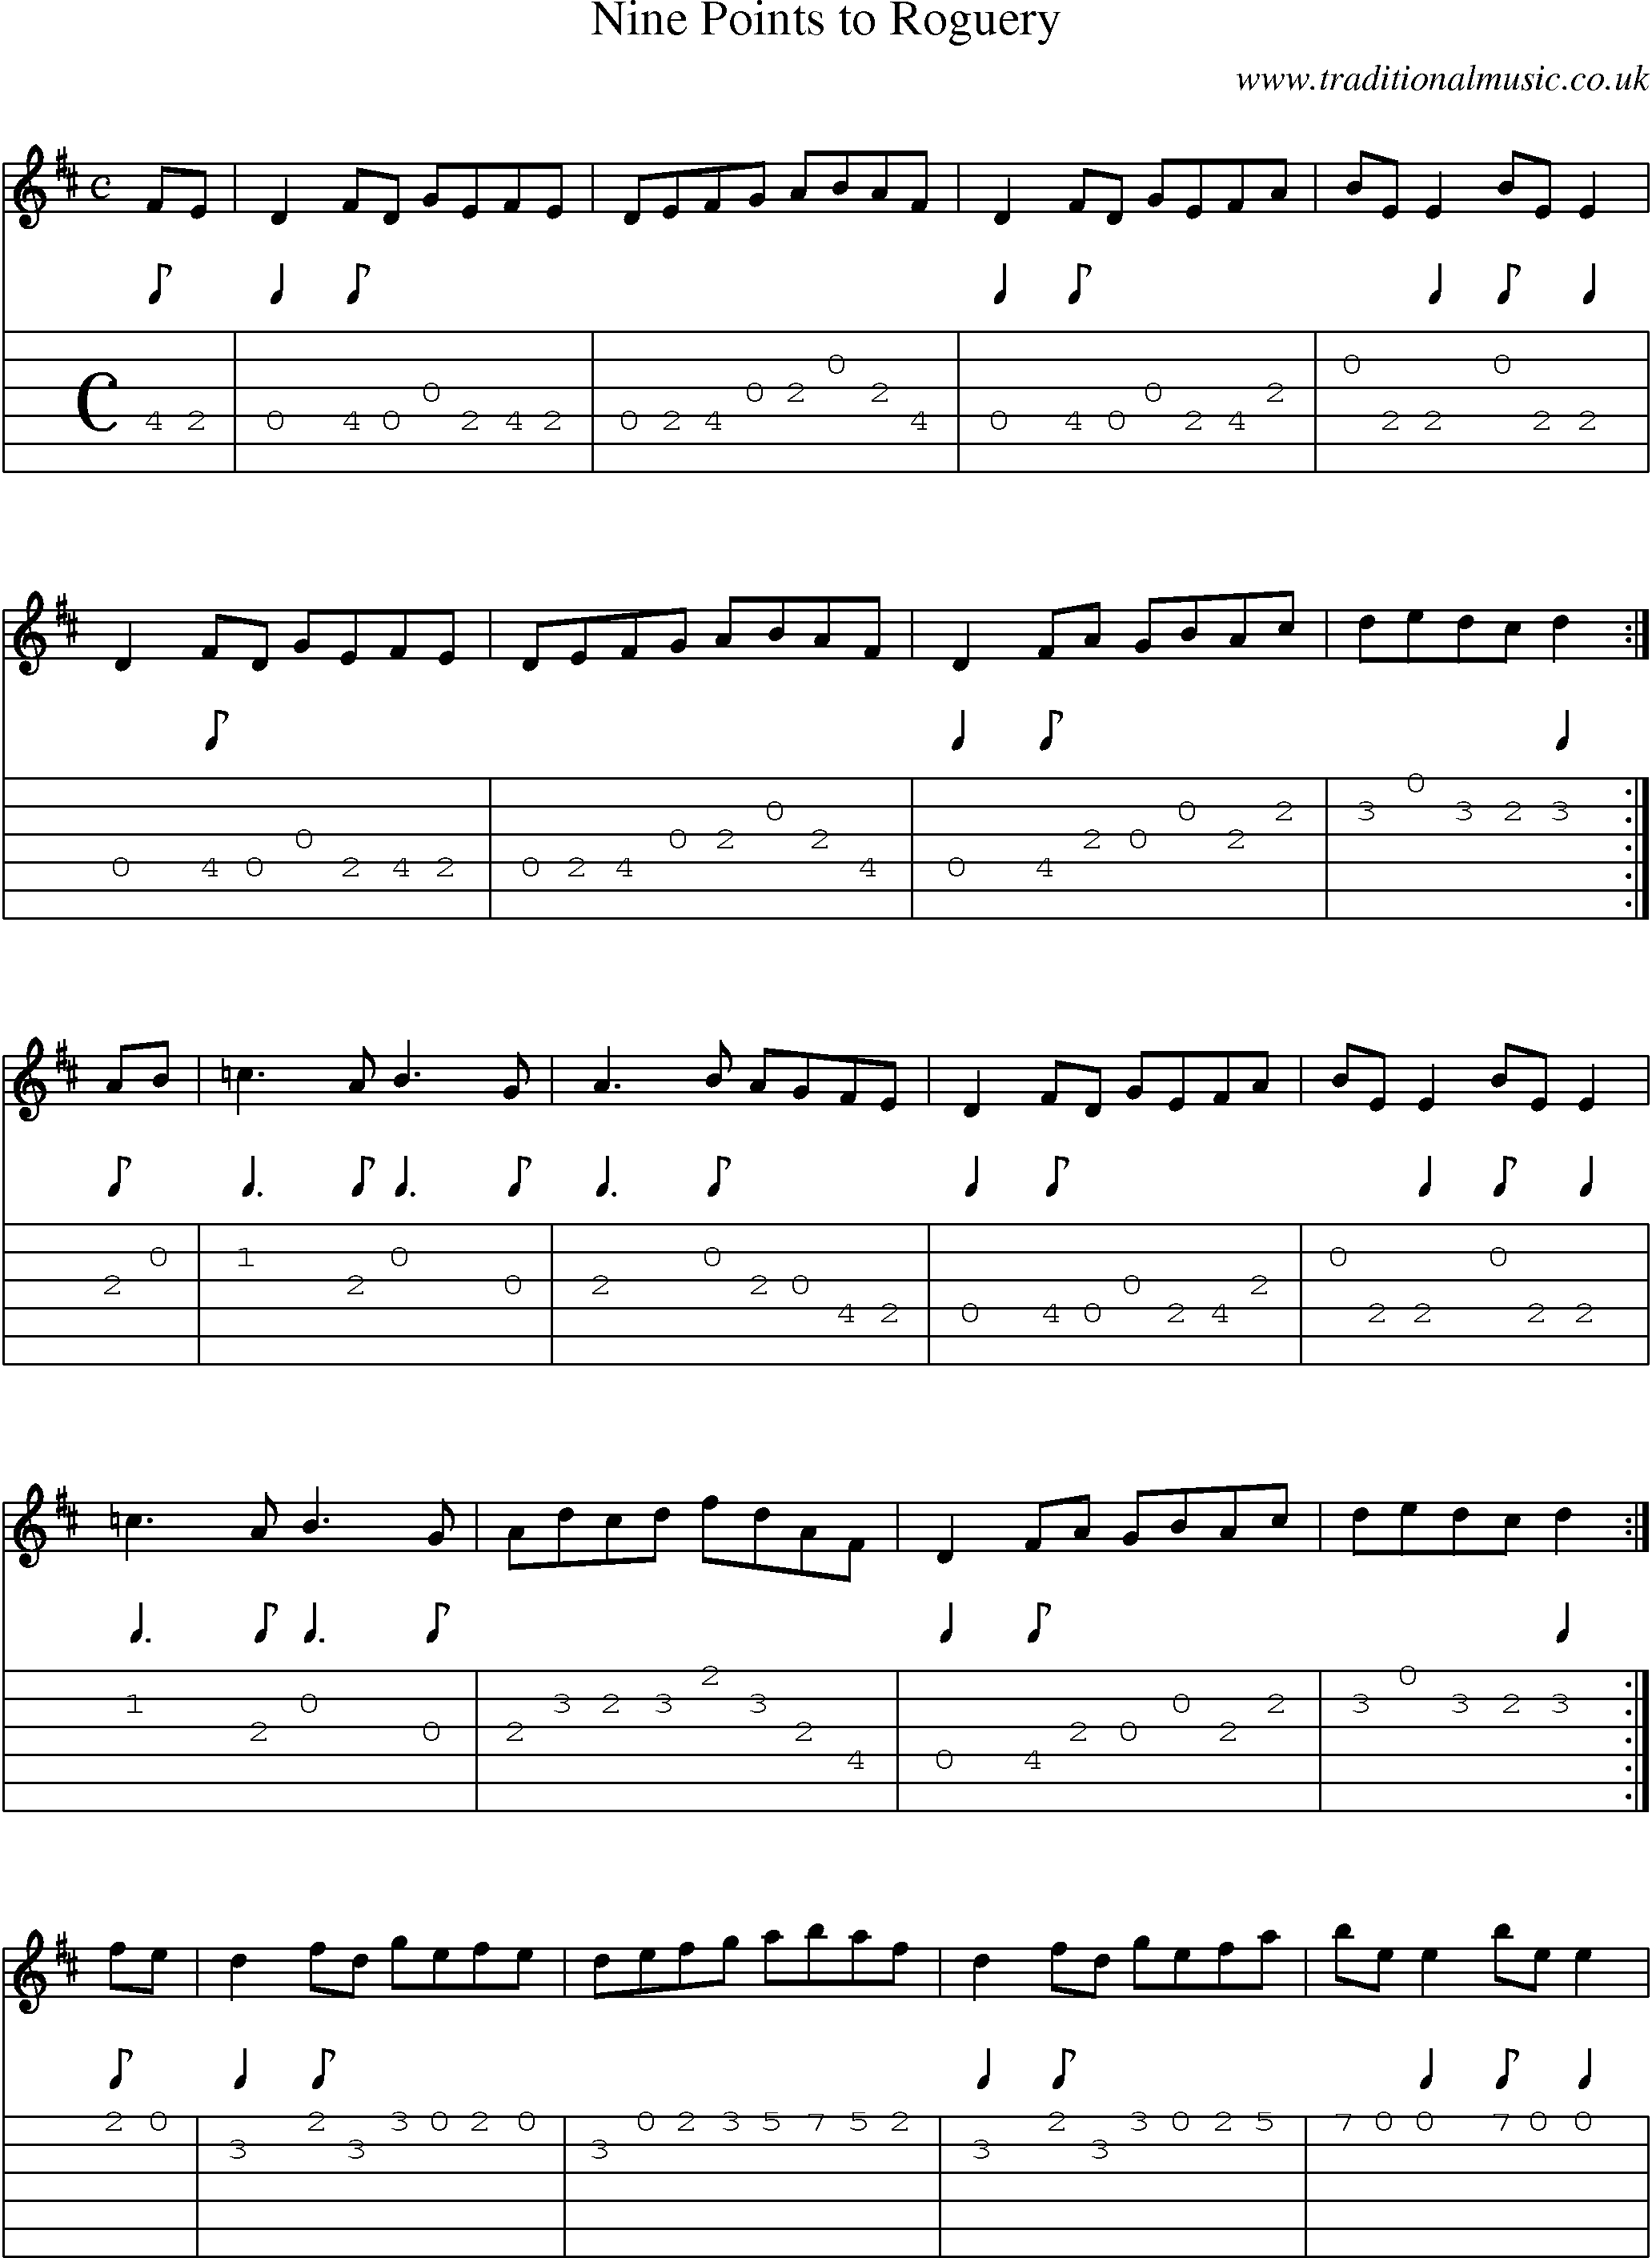 Music Score and Guitar Tabs for Nine Points To Roguery